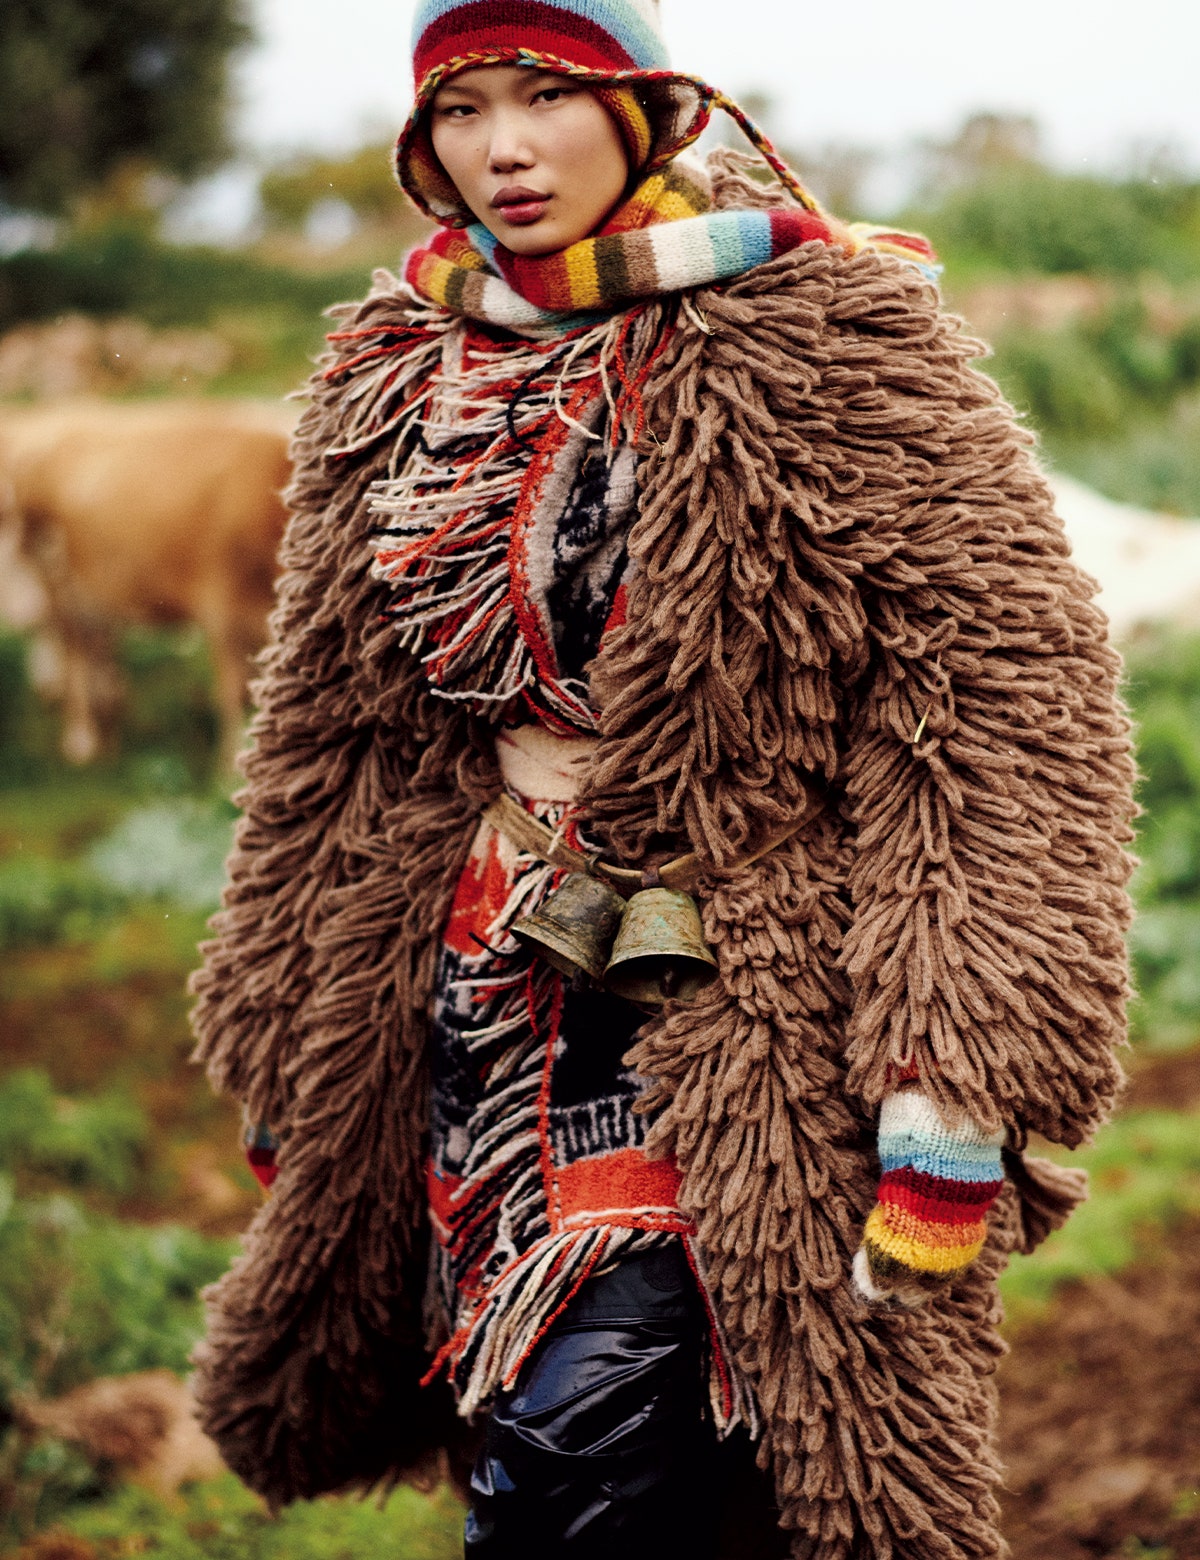 ''Nomad'' by Giampaolo Sgura for Vogue Japan September 2021